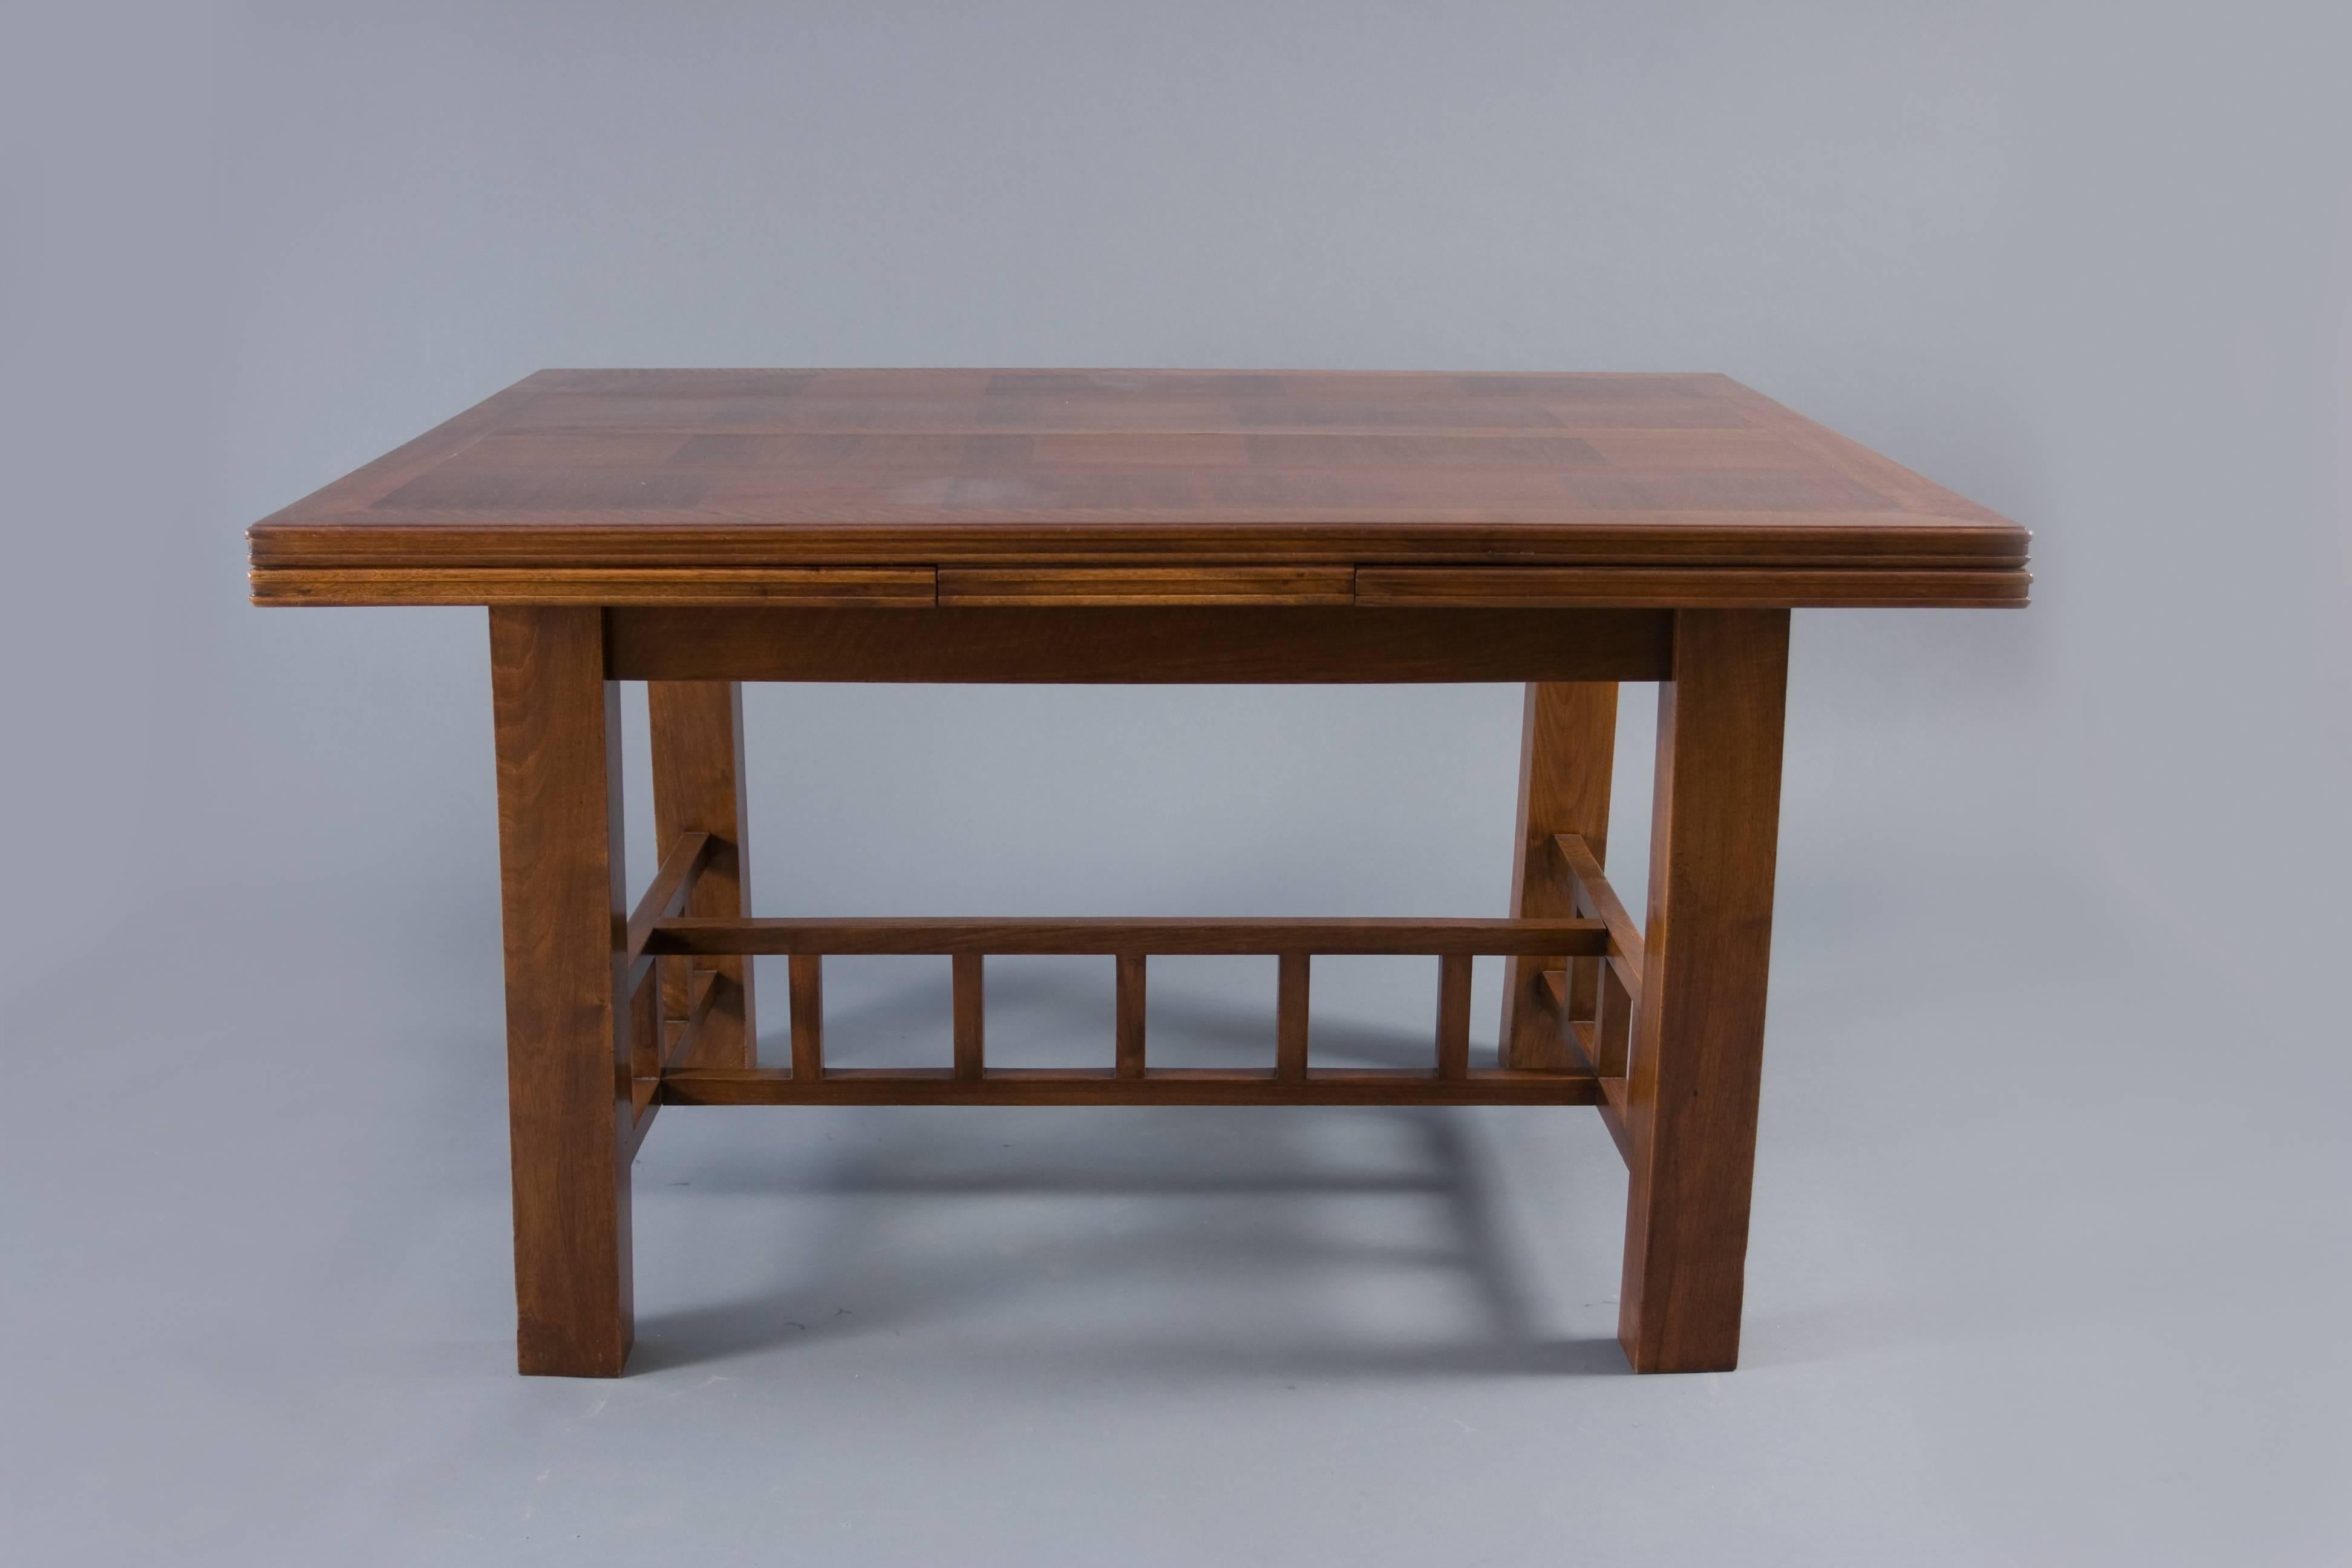 French modernist table attributed to Francis Jourdain, considered to be the 